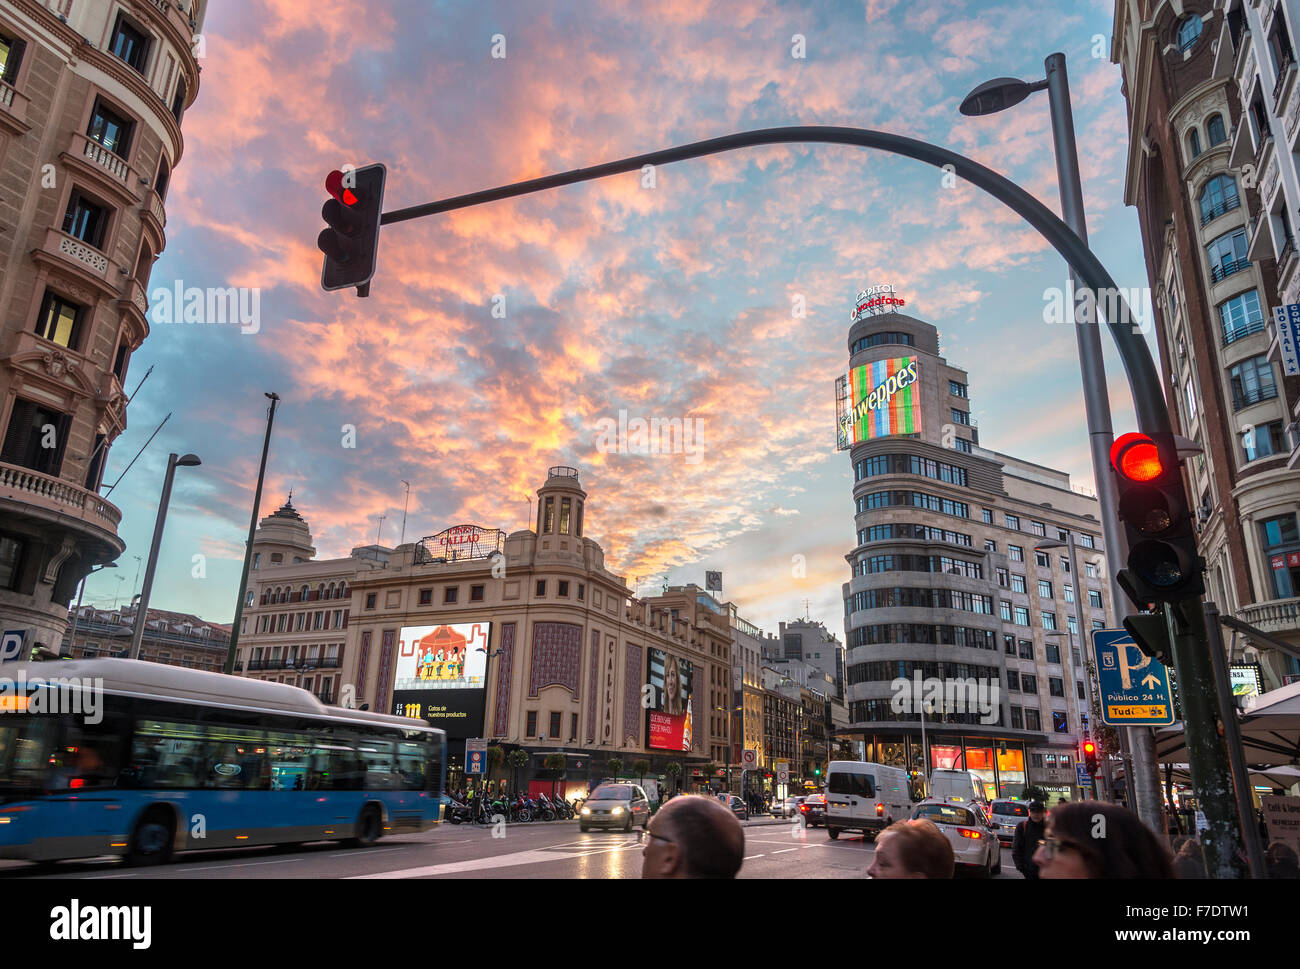 The Gran Via, in the heart of Madrid's shopping district, with Carrion building and Cine Callao in the background. Madrid, Spain Stock Photo